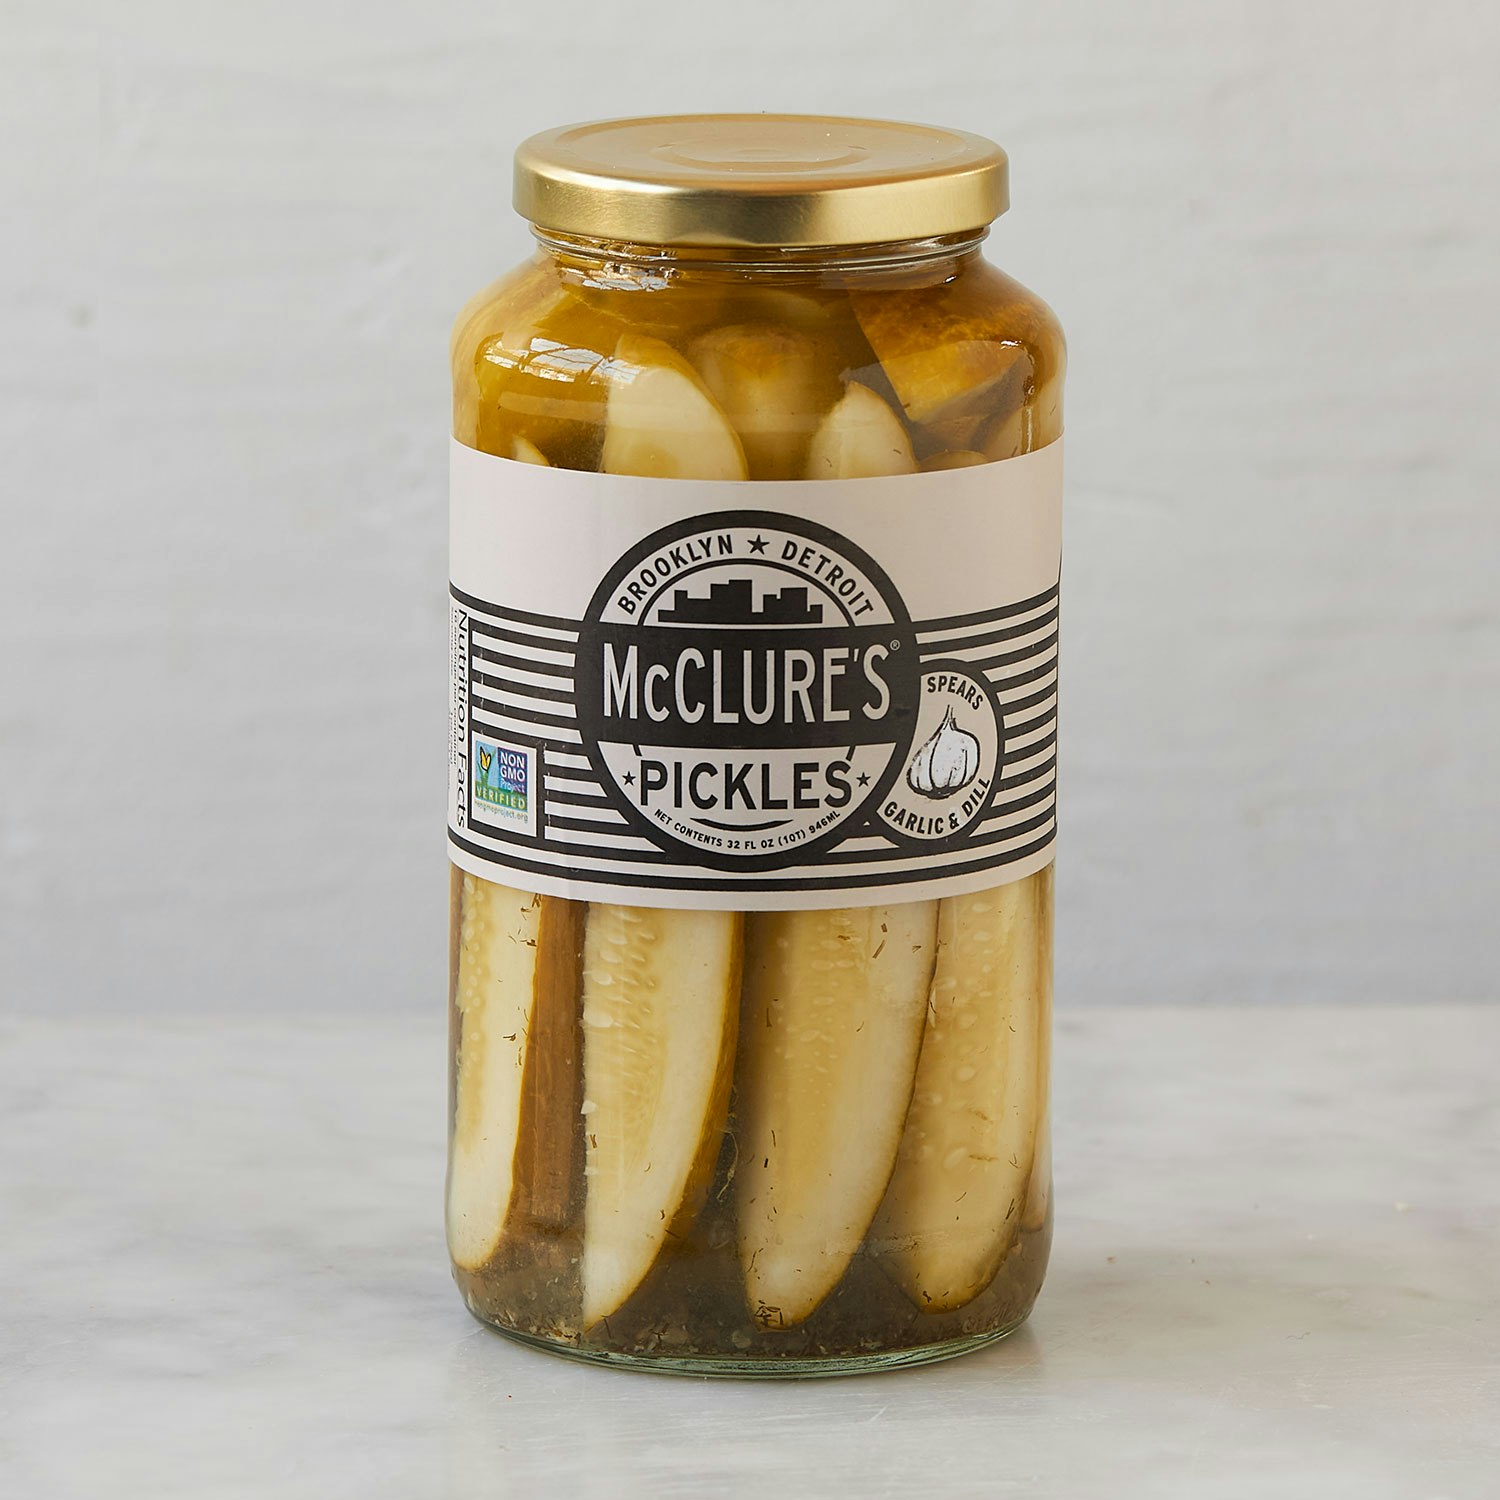 mcclures pickles garlic dill pickles specialty foods